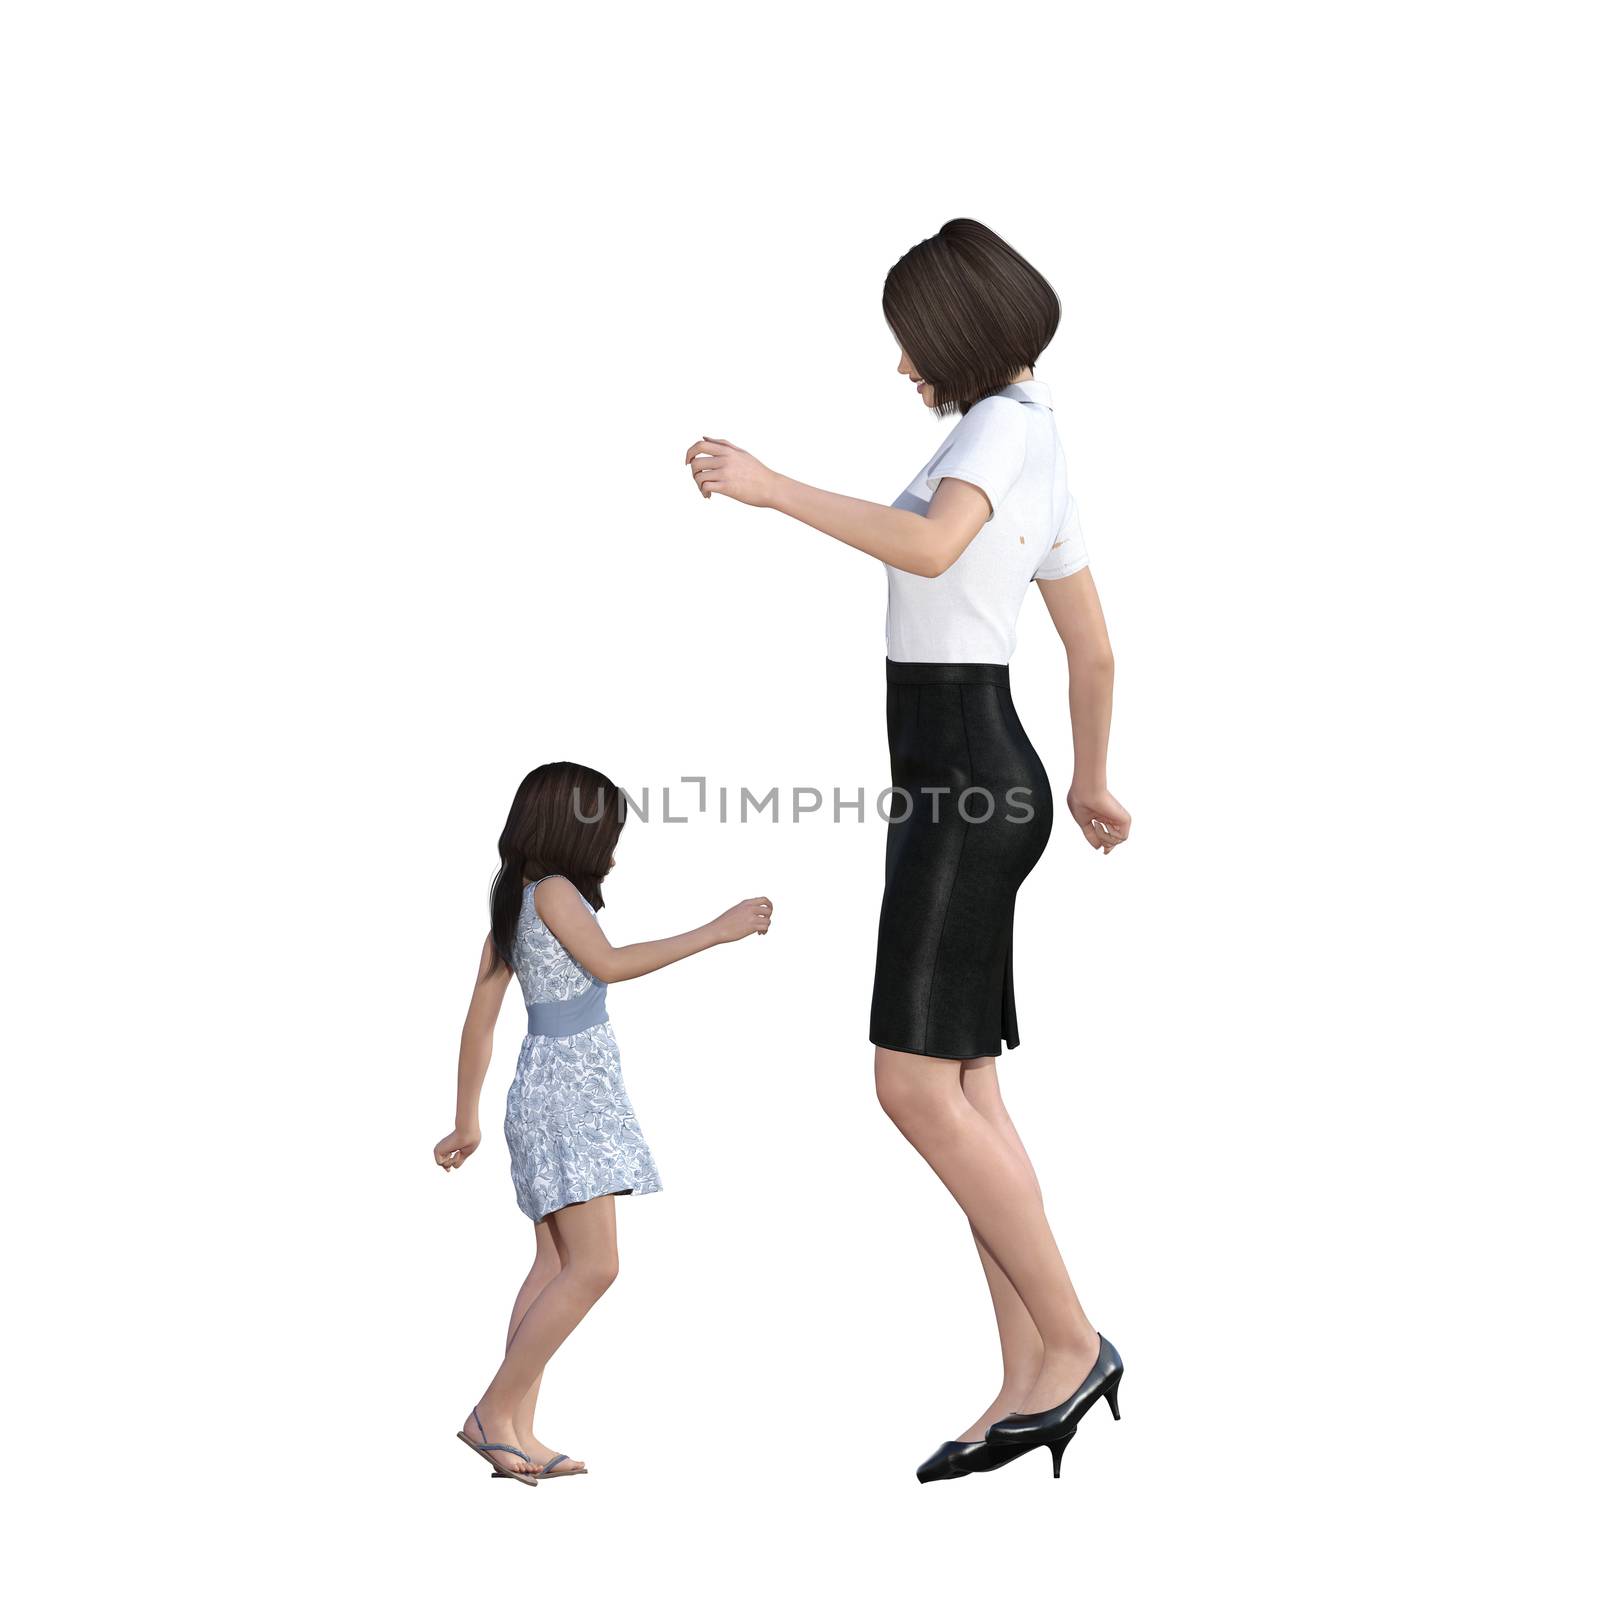 Mother Daughter Interaction of Dancing Together as an Illustration Concept